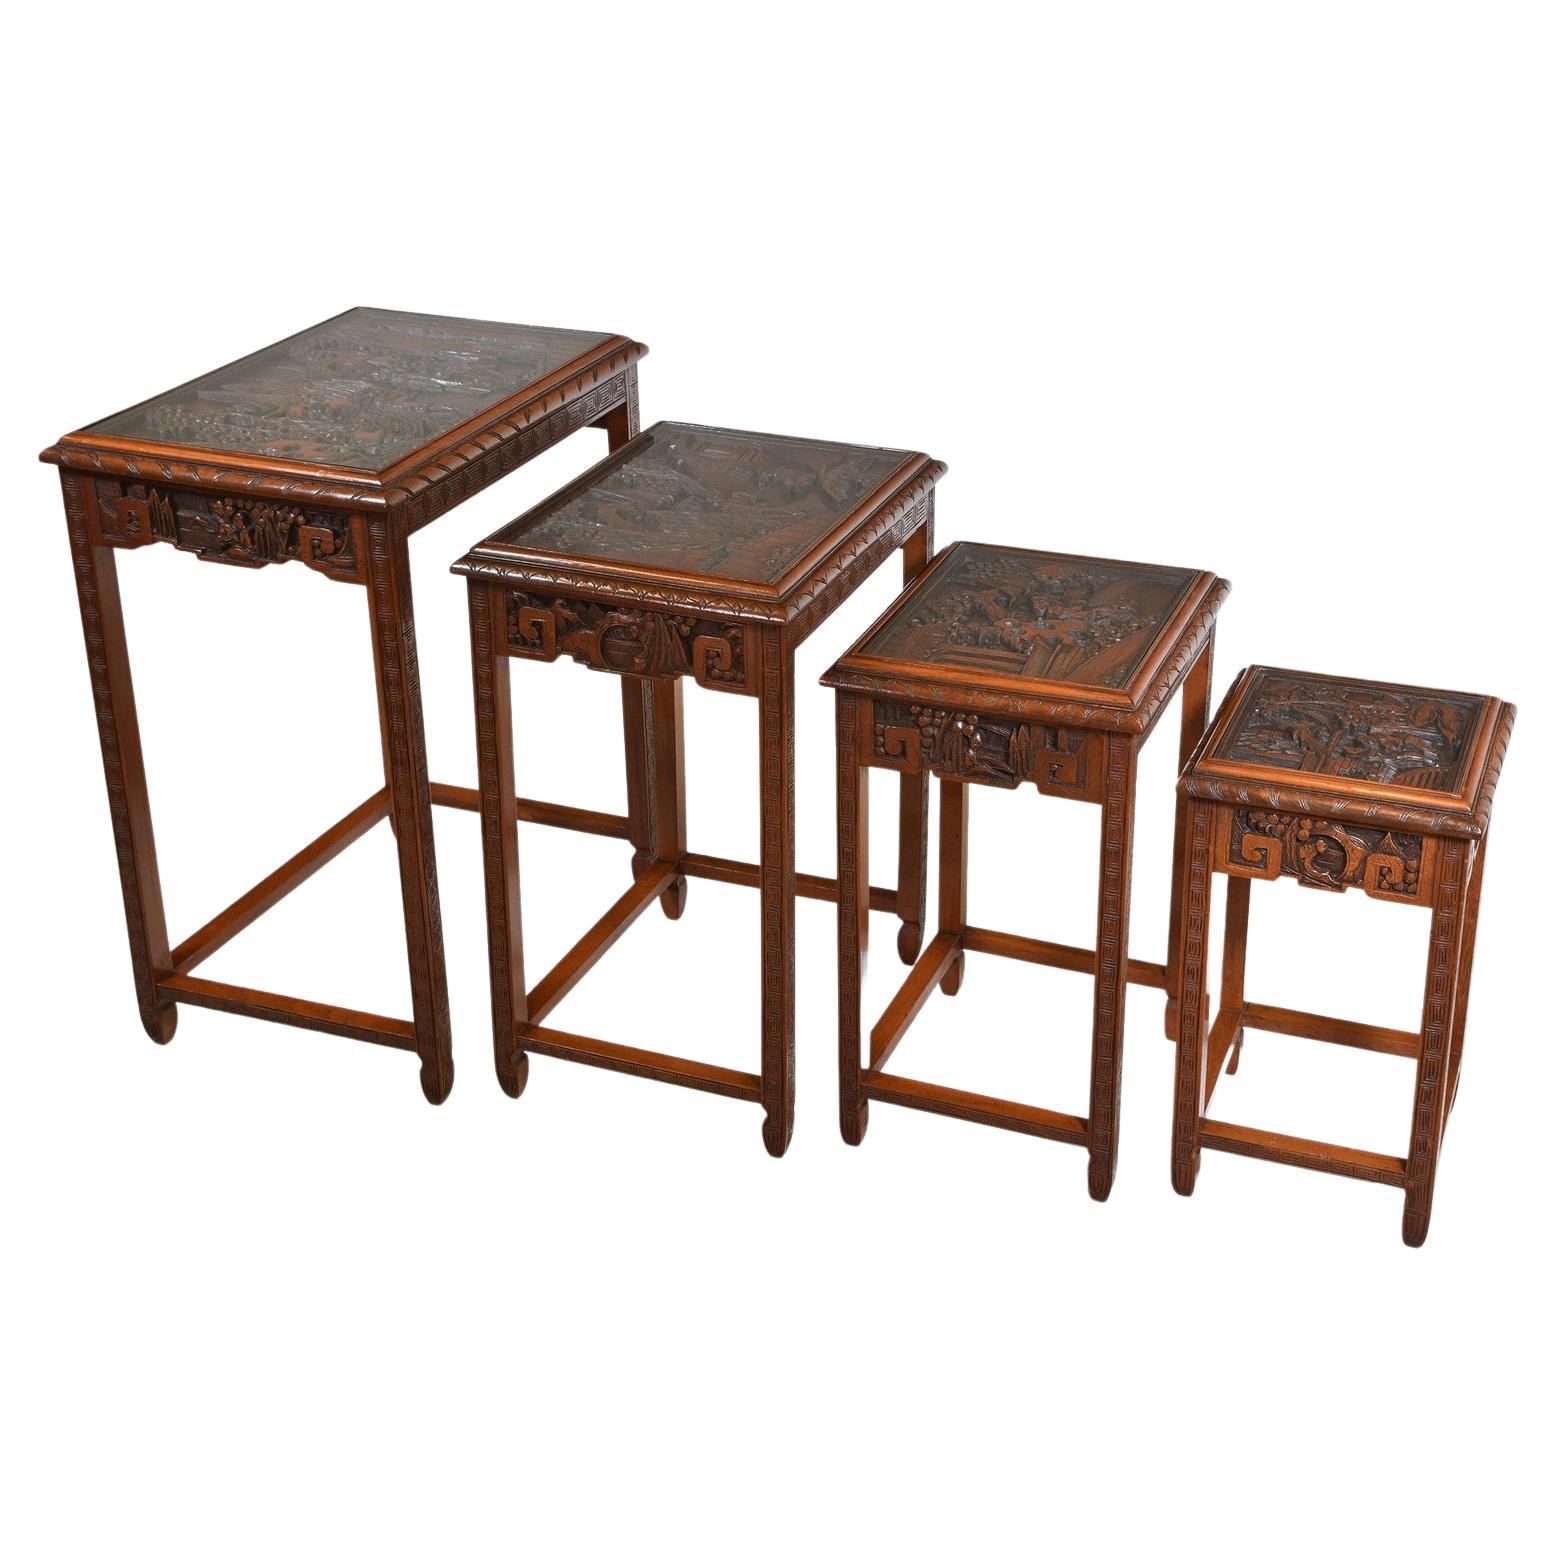 Vintage Chinese Teak Carved Quartetto Nest of Four Tables with Drawer